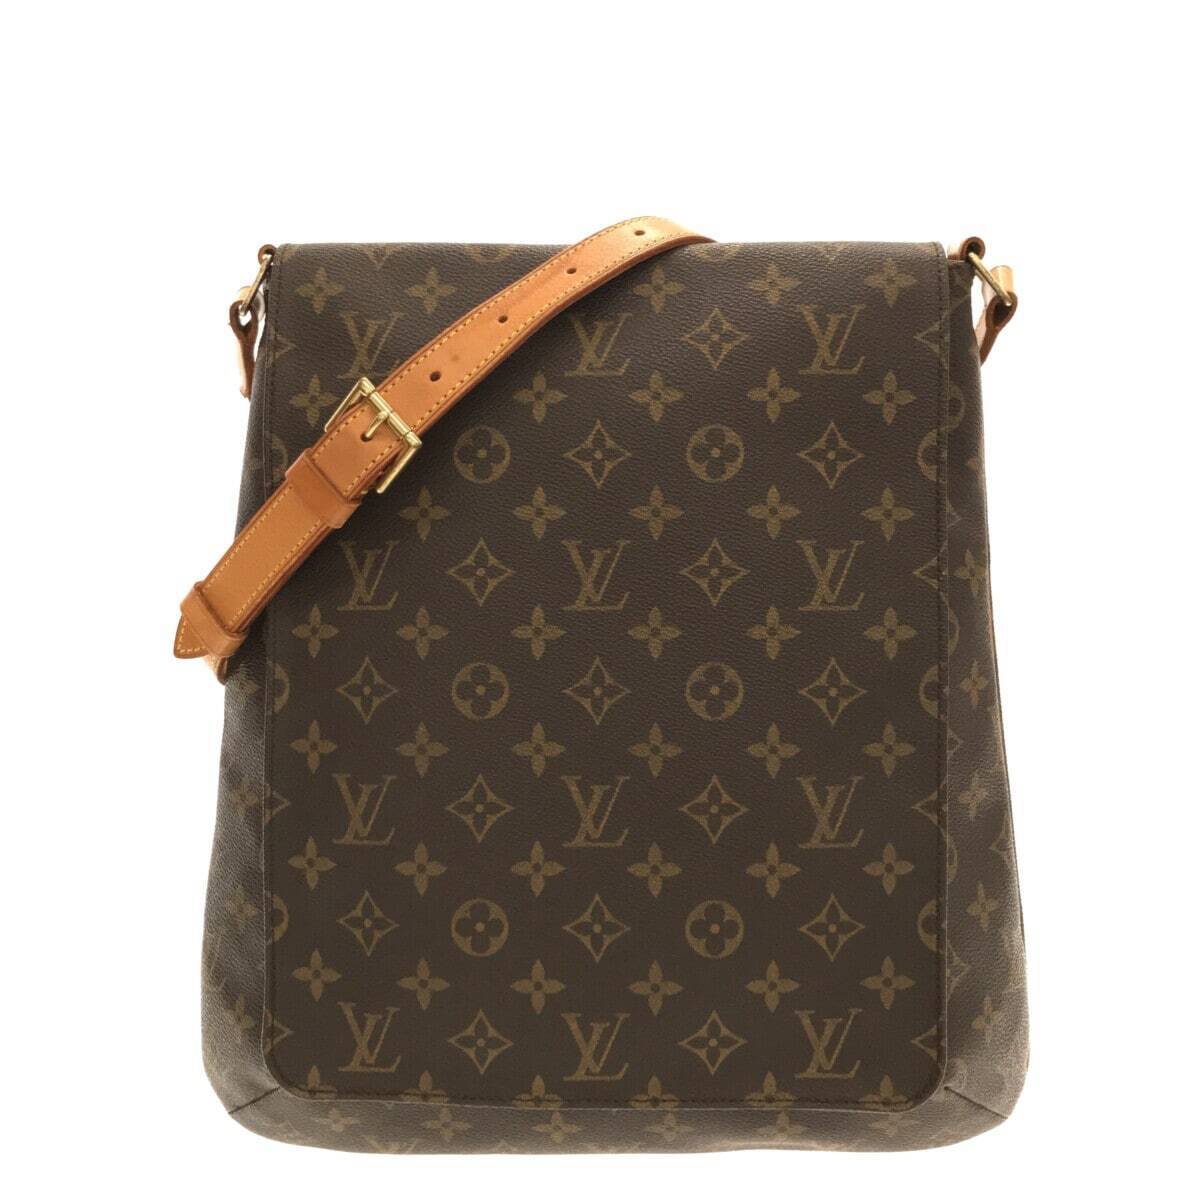 Shop for Louis Vuitton Monogram Canvas Leather Musette Salsa GM Bag -  Shipped from USA